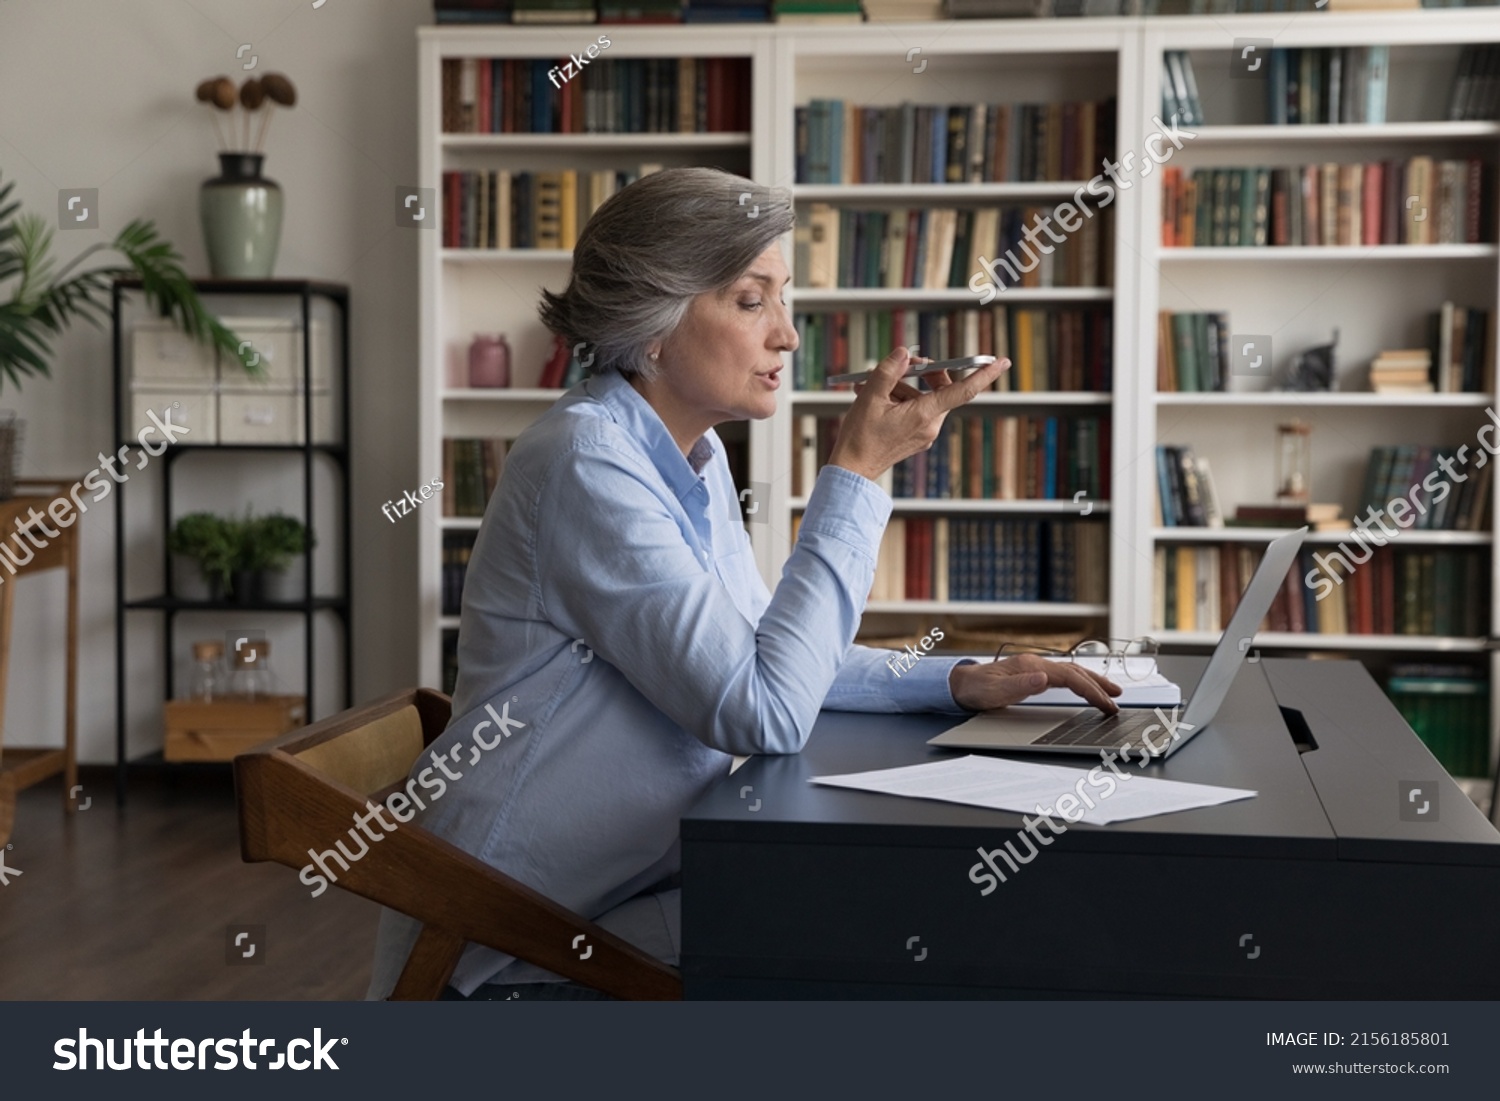 193,563 Female older Stock Photos, Images & Photography | Shutterstock